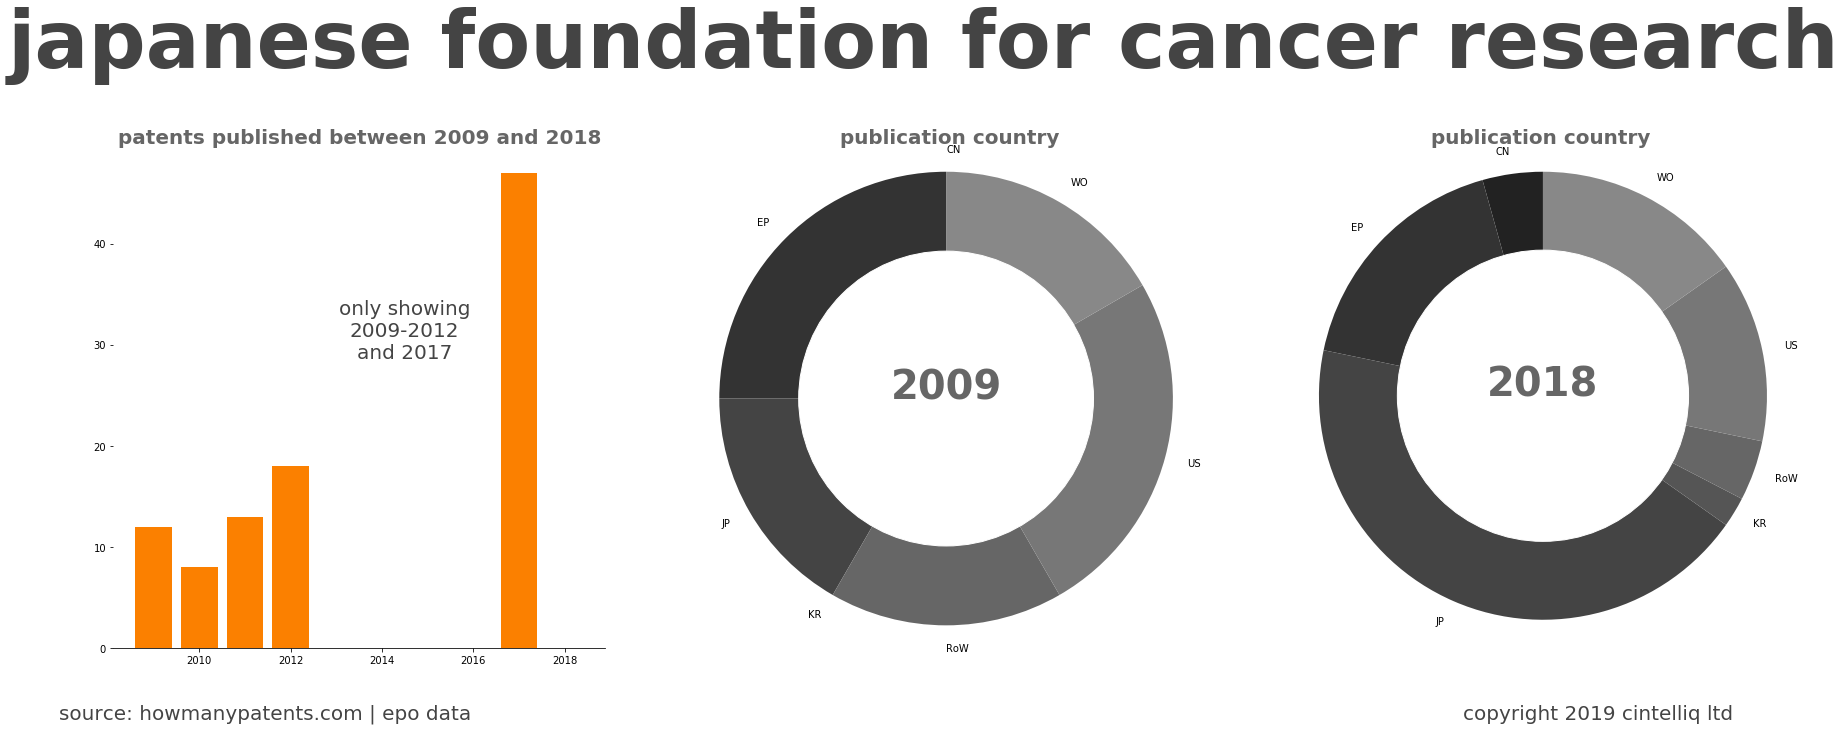 summary of patents for Japanese Foundation For Cancer Research